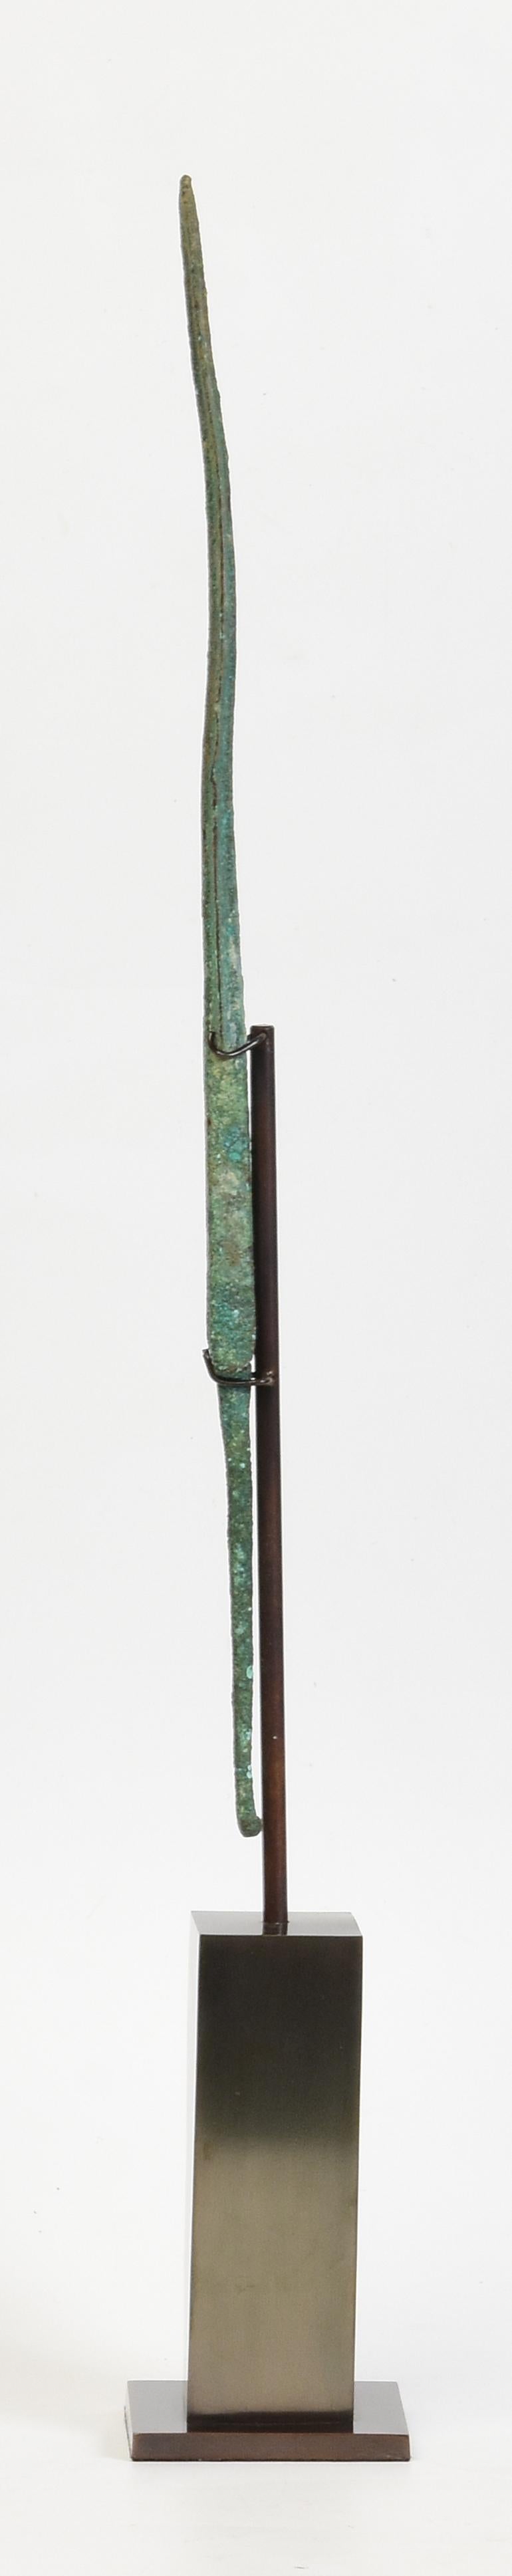 Ancient Antique Luristan Bronze Spear Early Iron Age Weapon In Good Condition For Sale In Sampantawong, TH